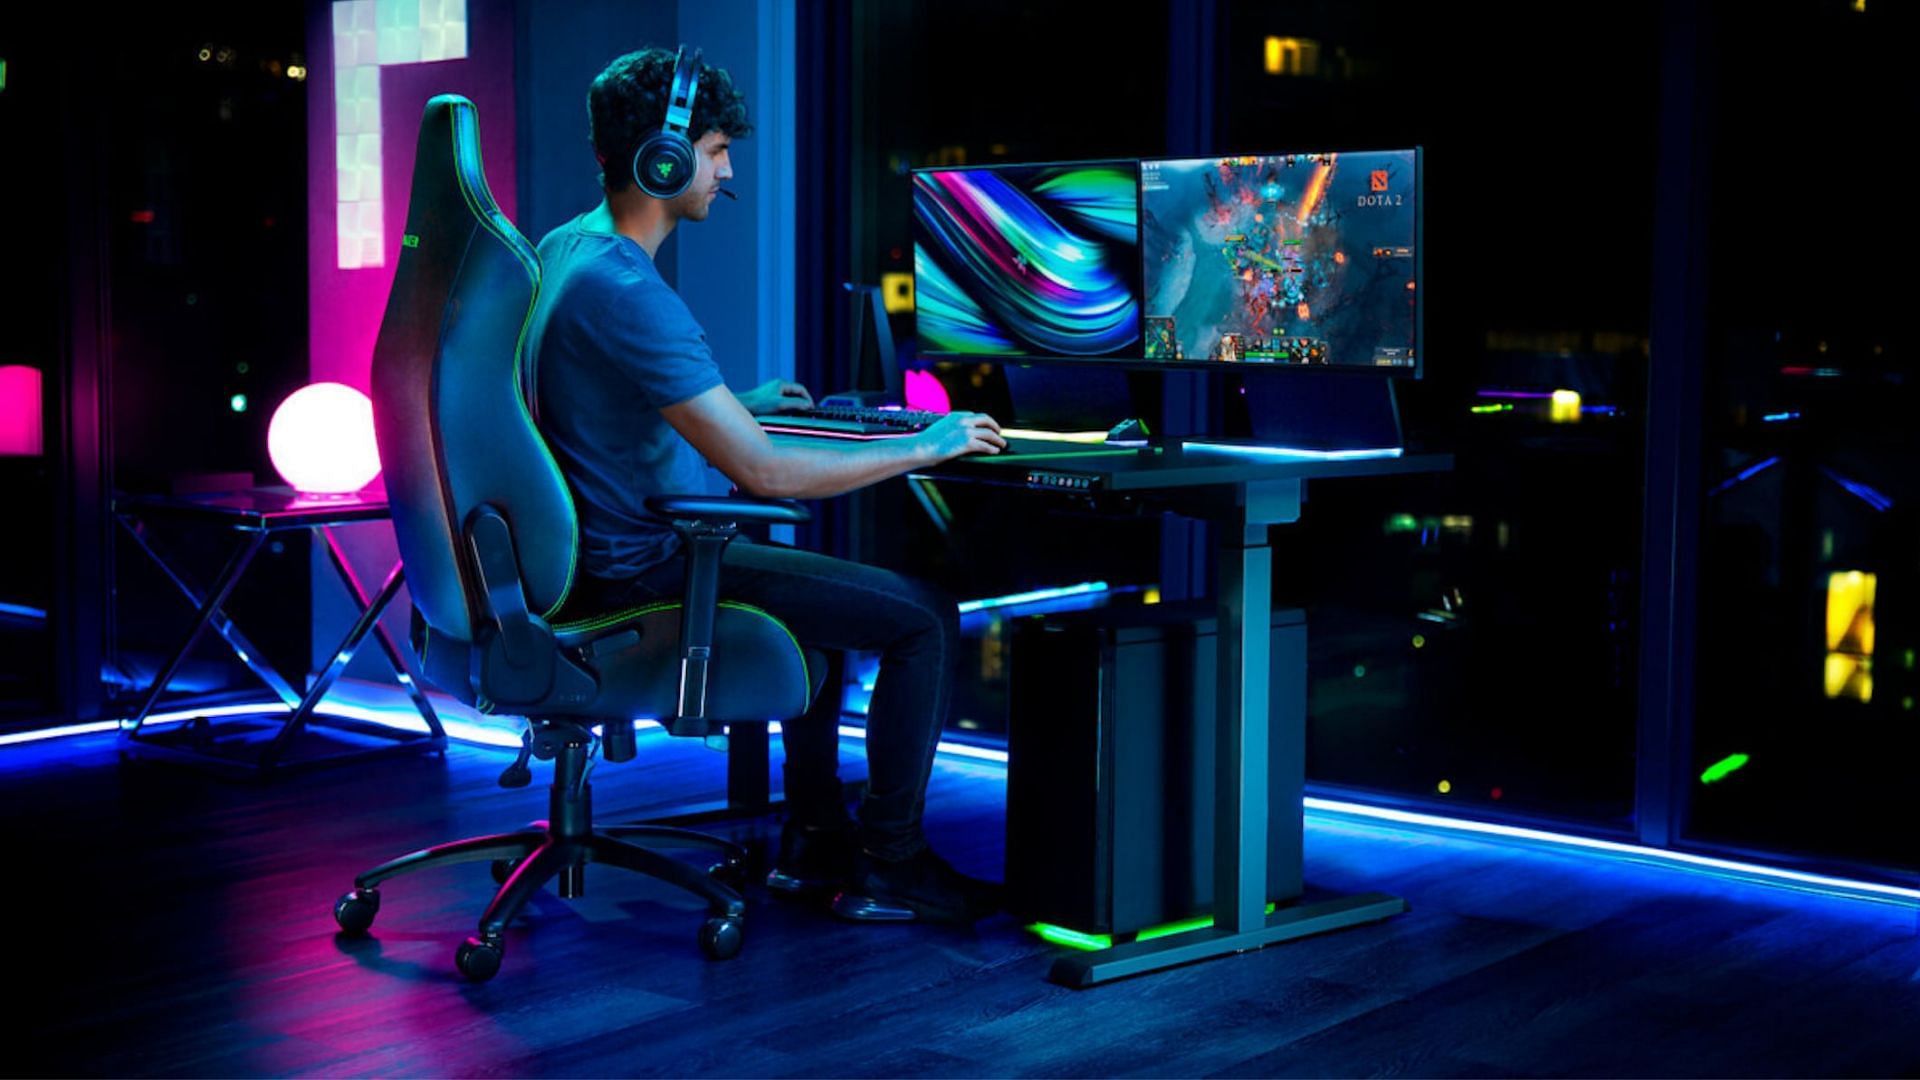 Gaming chairs are becoming increasingly common (Image via Shutterstock)